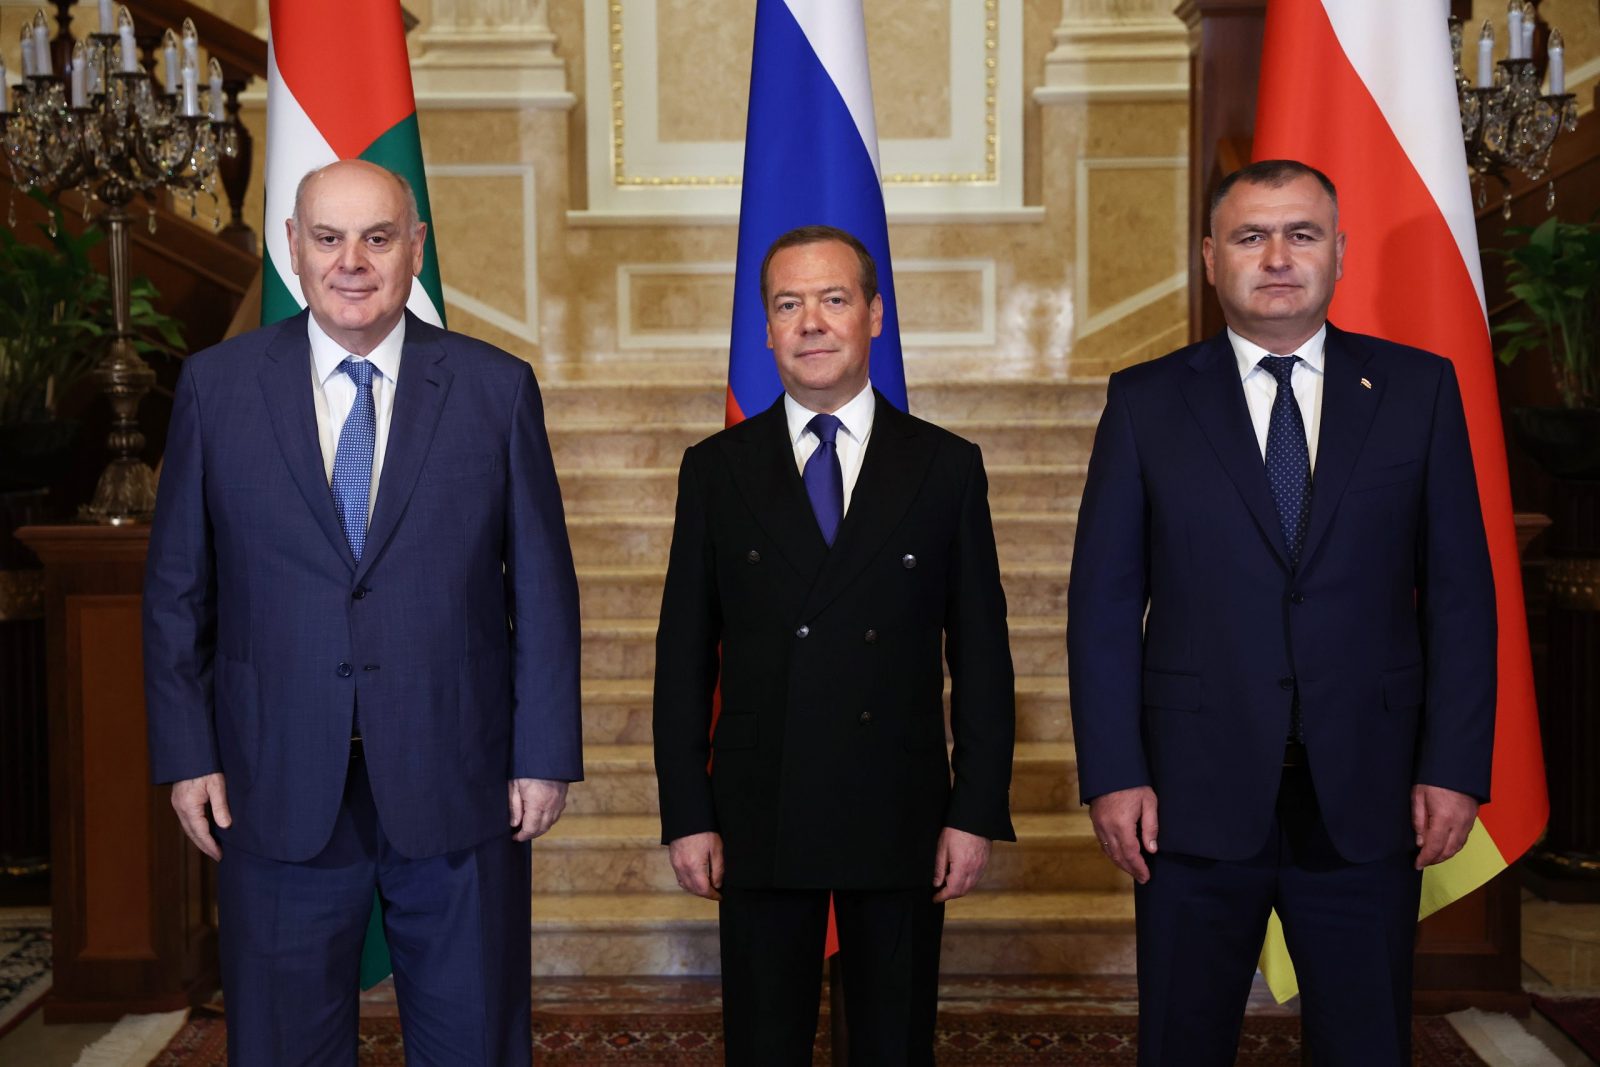 epa10819776 Deputy head of Russia's Security Council and chairman of the United Russia party, Dmitry Medvedev (C) poses for a picture during his meeting with President of the Republic of Abkhazia Aslan Bzhania (L) and President of the Republic of South Ossetia Alan Gagloev (R) in Moscow, Russia, 25 August 2023.  EPA/VALERY SHARIFULIN / SPUTNIK / GOVERNMENT PRESS SERVICE POOL